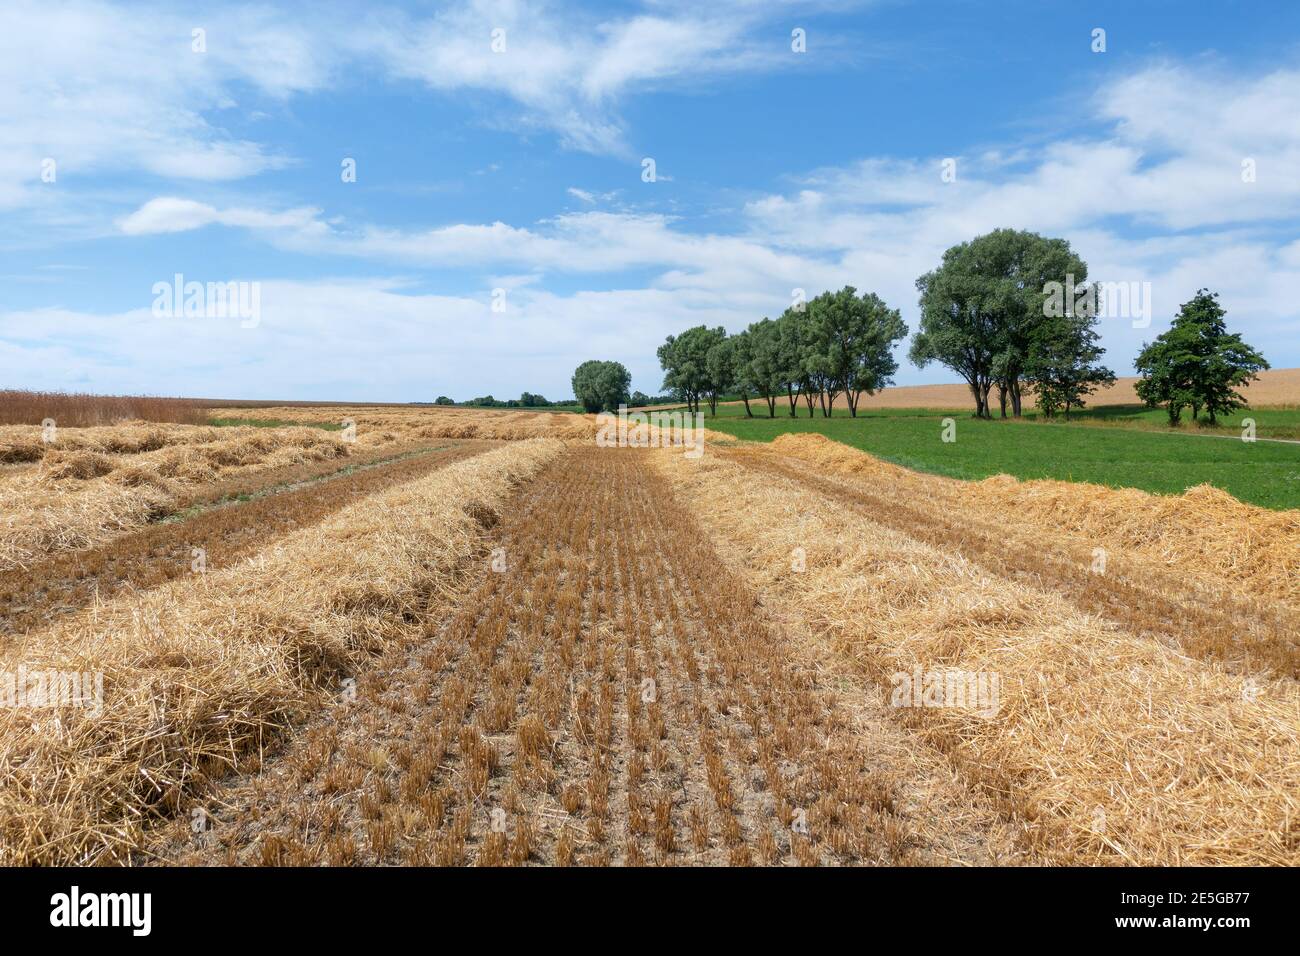 Stubble field with rows of straw in an idyllic landscape Stock Photo